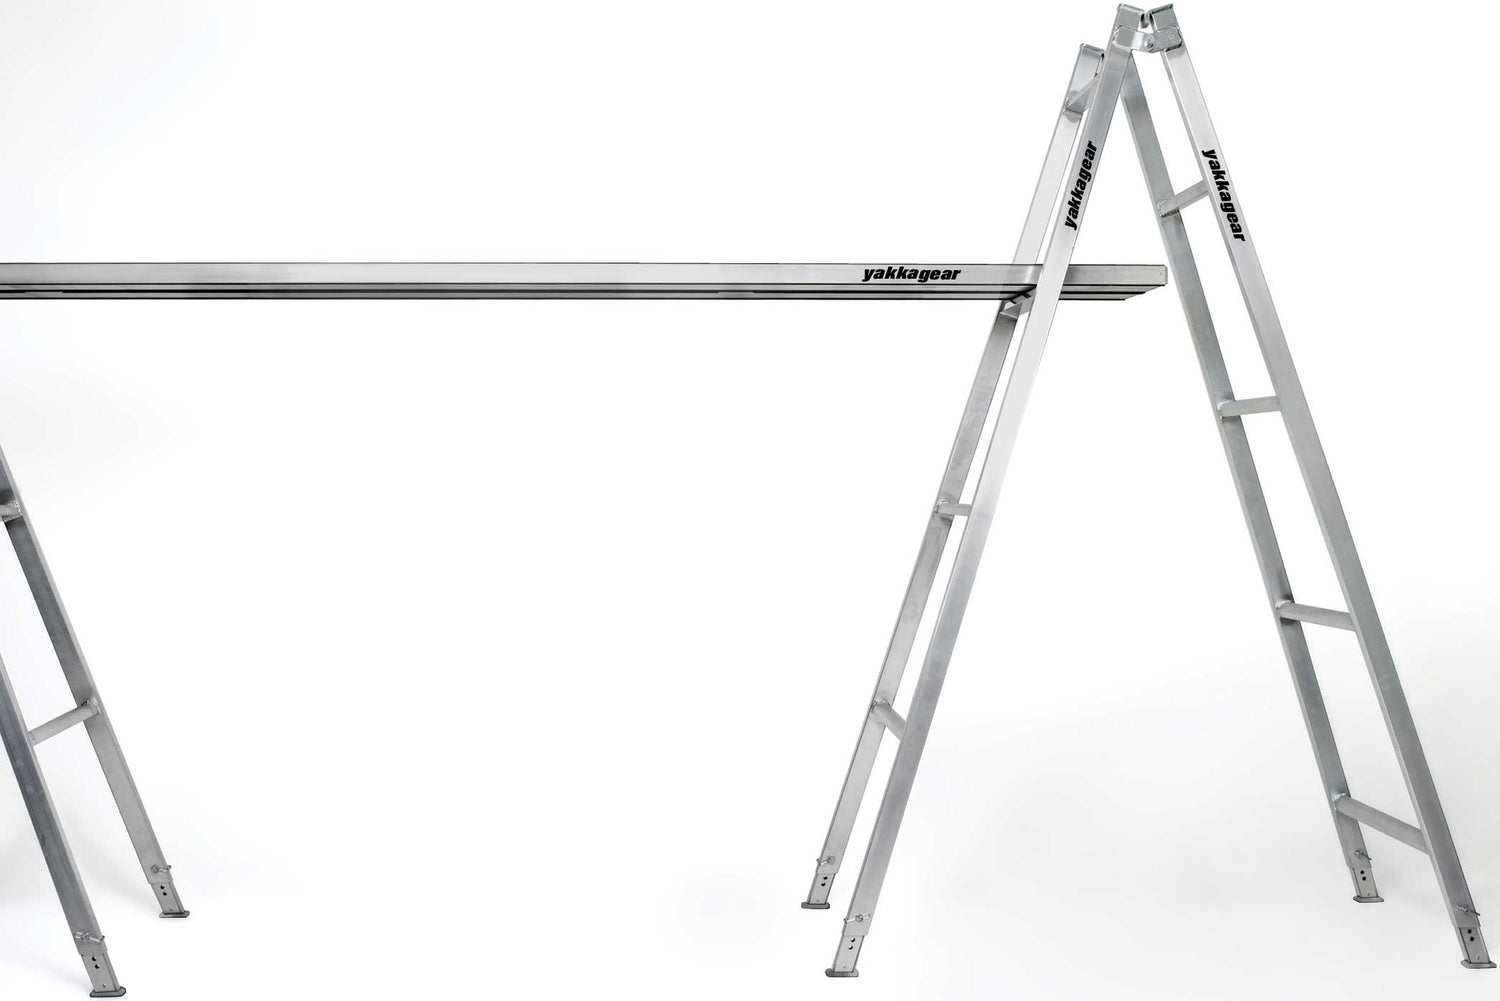 Yakka Gear Melbourne Made Sustainable Australia Aluminium Trestles as access equipment. Various sized trestles available including 1.8m, 2.4m, 3.0m, 3.6m, 4.2m, 4.8m. All the trestles are adjustable by 260mm. View from the side being used with planks on a white background. 